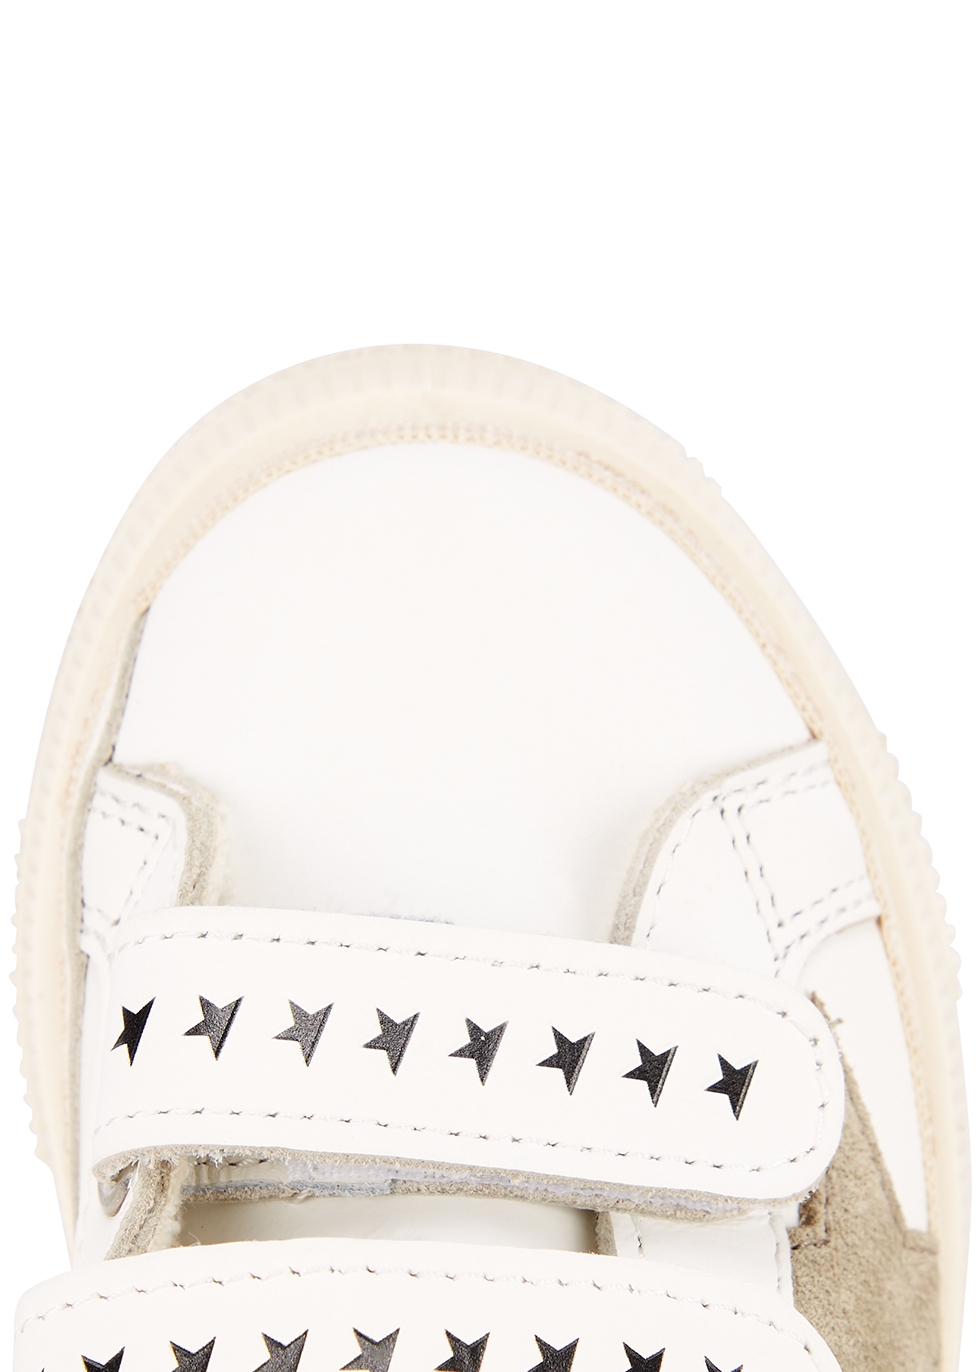 Harvey Nichols Shoes Flat Shoes School Shoes IT20-IT26 KIDS May School white leather sneakers 